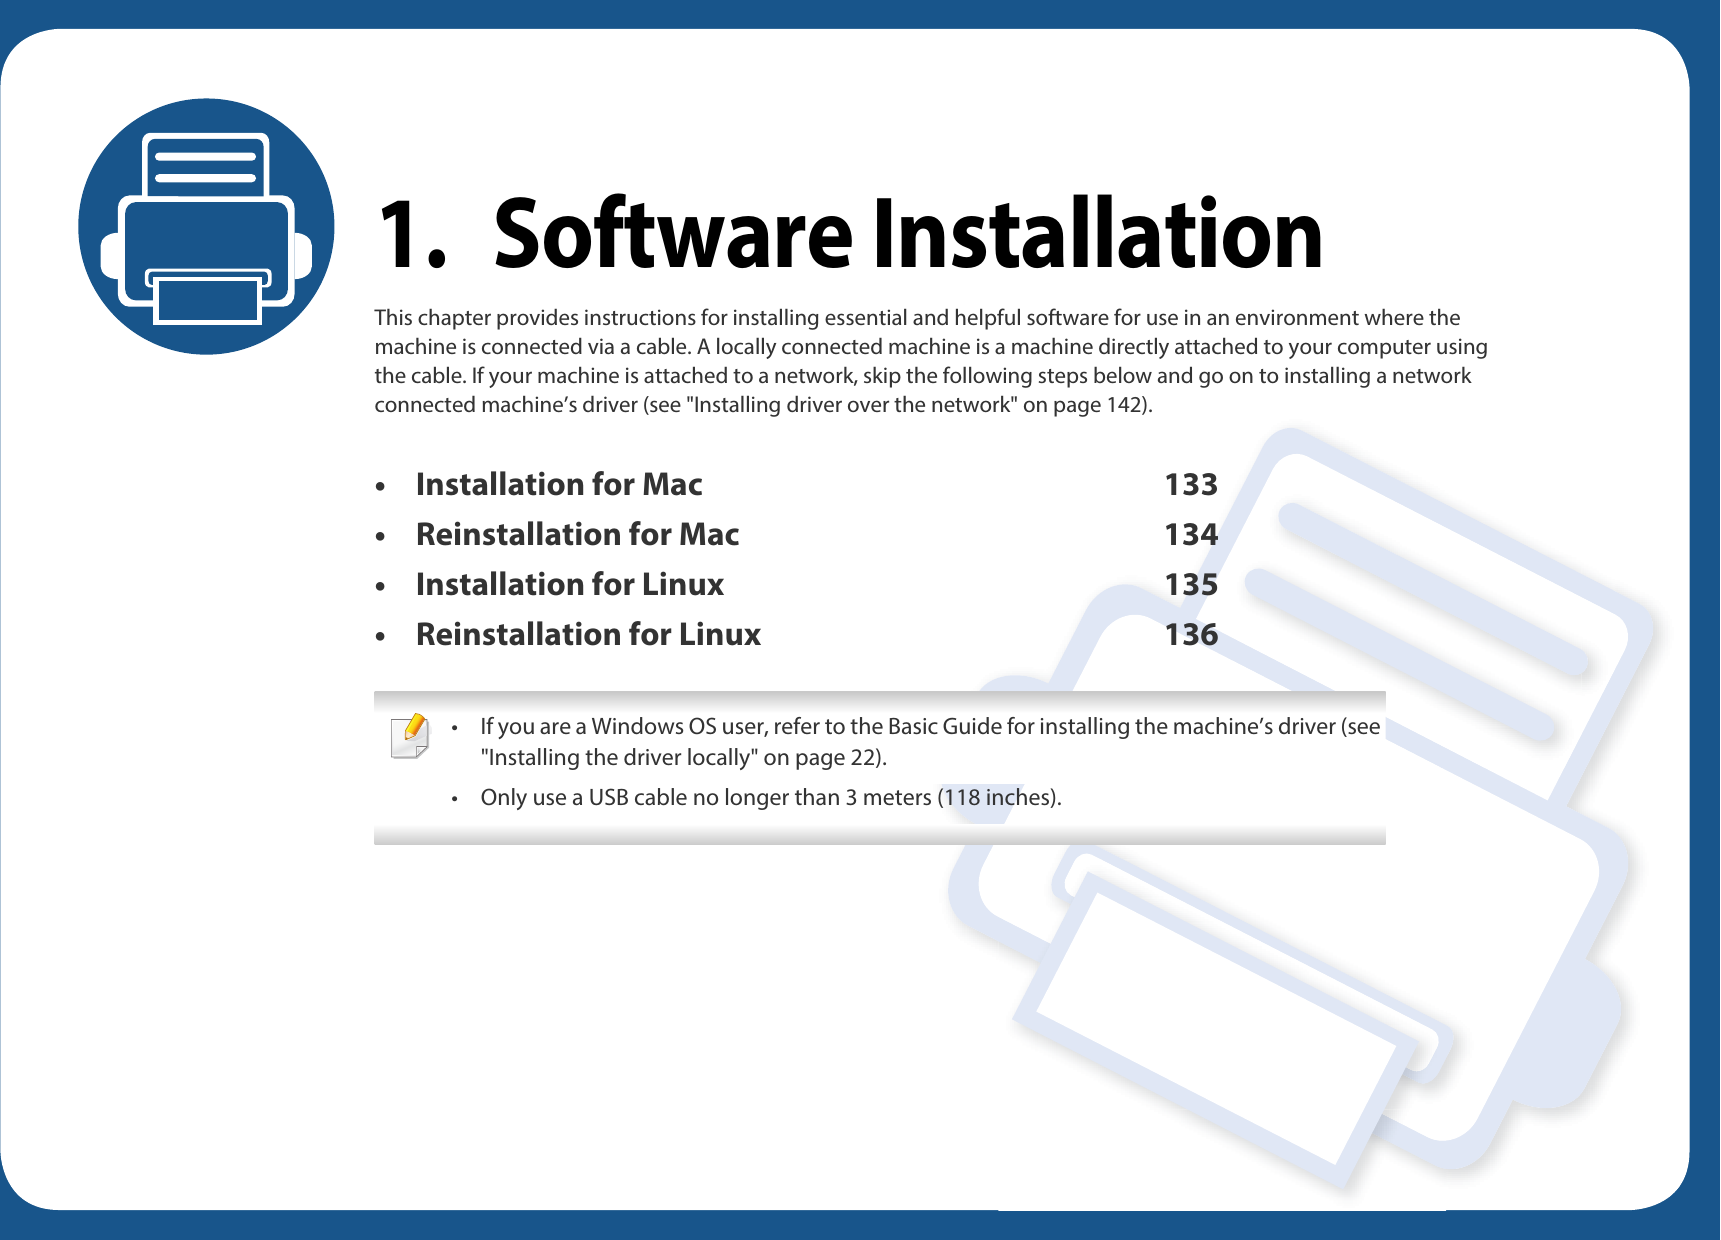 1. Software InstallationThis chapter provides instructions for installing essential and helpful software for use in an environment where the machine is connected via a cable. A locally connected machine is a machine directly attached to your computer using the cable. If your machine is attached to a network, skip the following steps below and go on to installing a network connected machine’s driver (see &quot;Installing driver over the network&quot; on page 142).• Installation for Mac 133• Reinstallation for Mac 134• Installation for Linux 135• Reinstallation for Linux 136 • If you are a Windows OS user, refer to the Basic Guide for installing the machine’s driver (see &quot;Installing the driver locally&quot; on page 22).• Only use a USB cable no longer than 3 meters (118 inches). 